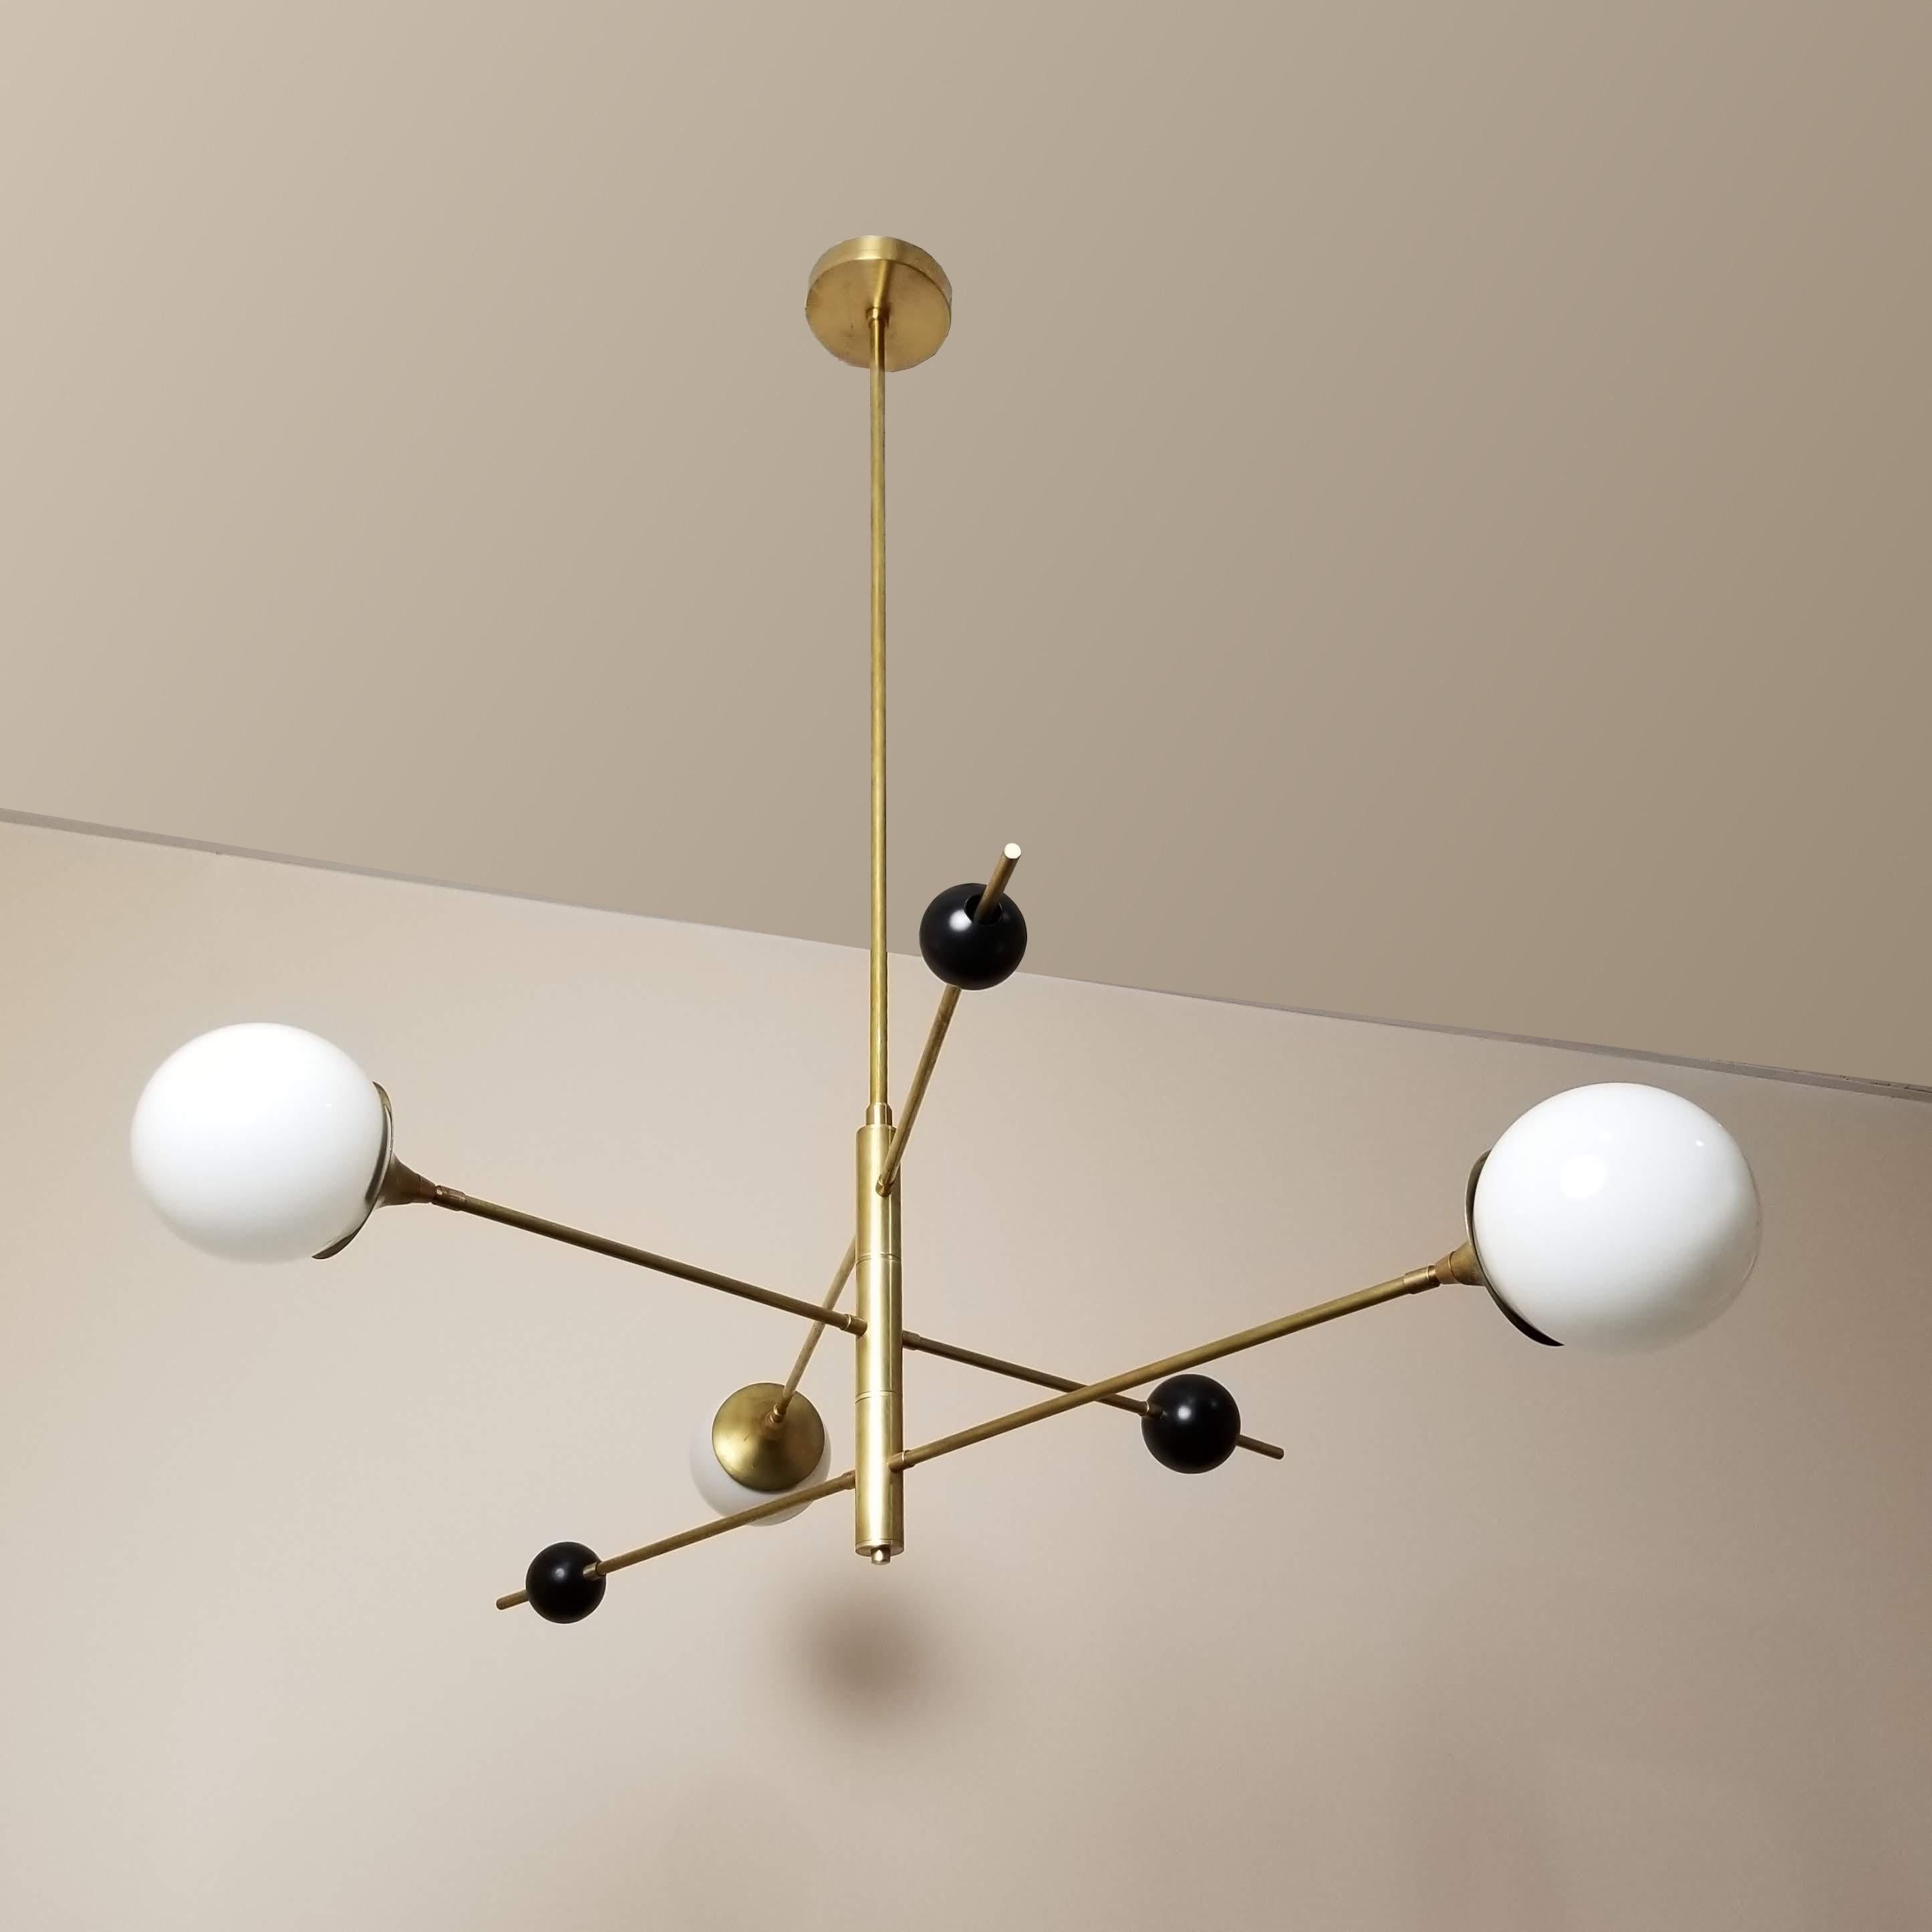 Handcrafted in NYC by Blueprint Lighting, our 'Orbital' three-arm pendant is a more compact version of our wildly popular 'Orbital' six-arm chandelier. It's a commanding statement piece with design elements of both Italian and French modernism and